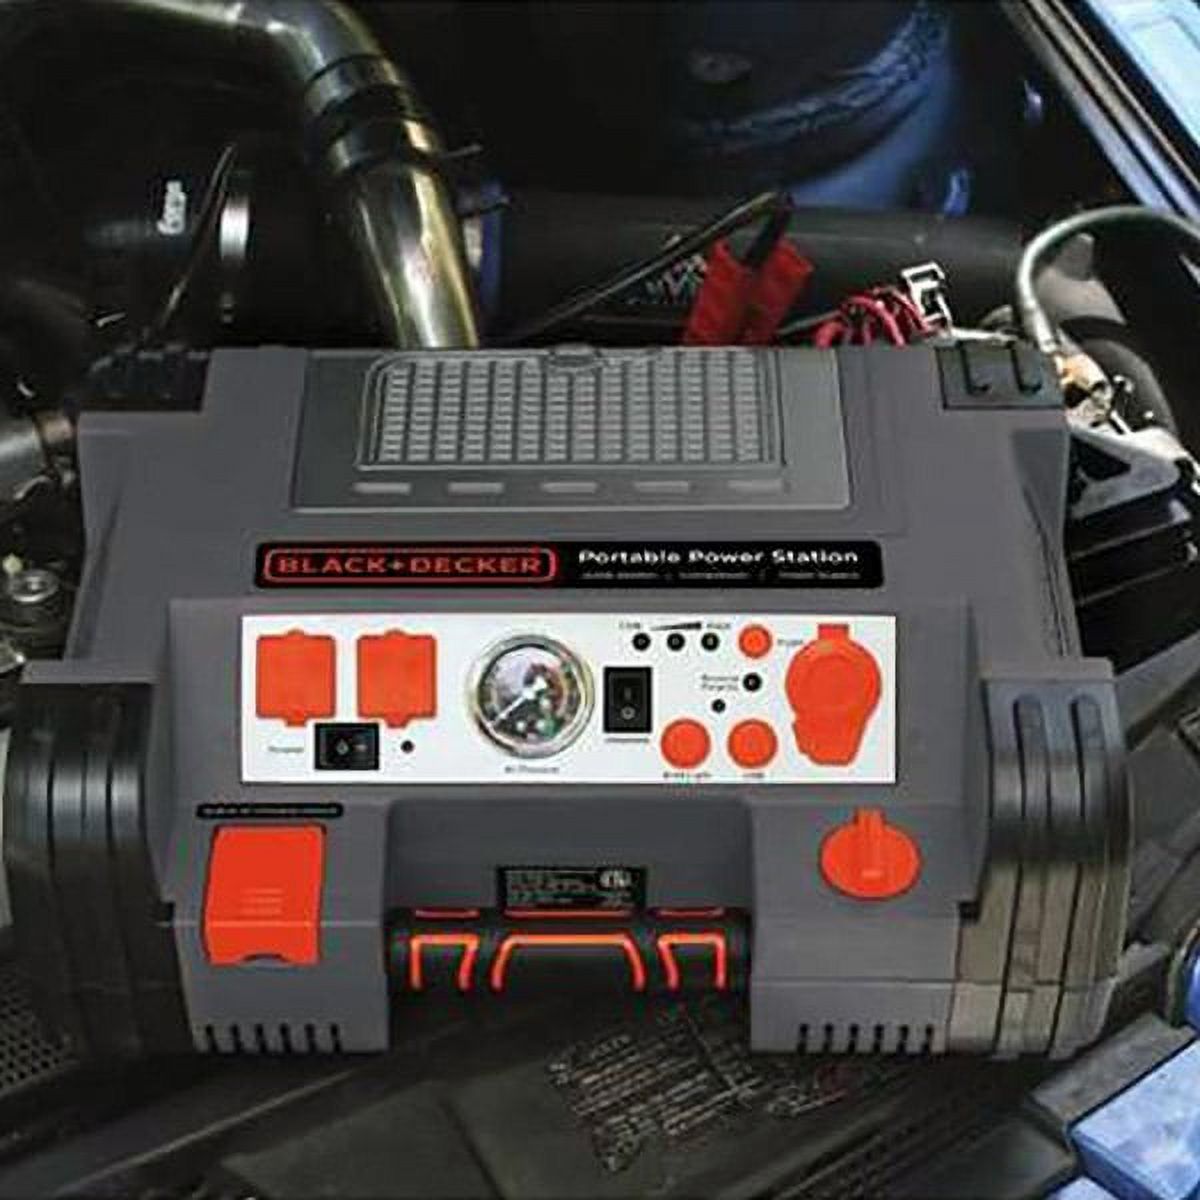 BLACK+DECKER PPRH5B Professional Portable Power Station with 120 PSI Air Compressor - image 1 of 7